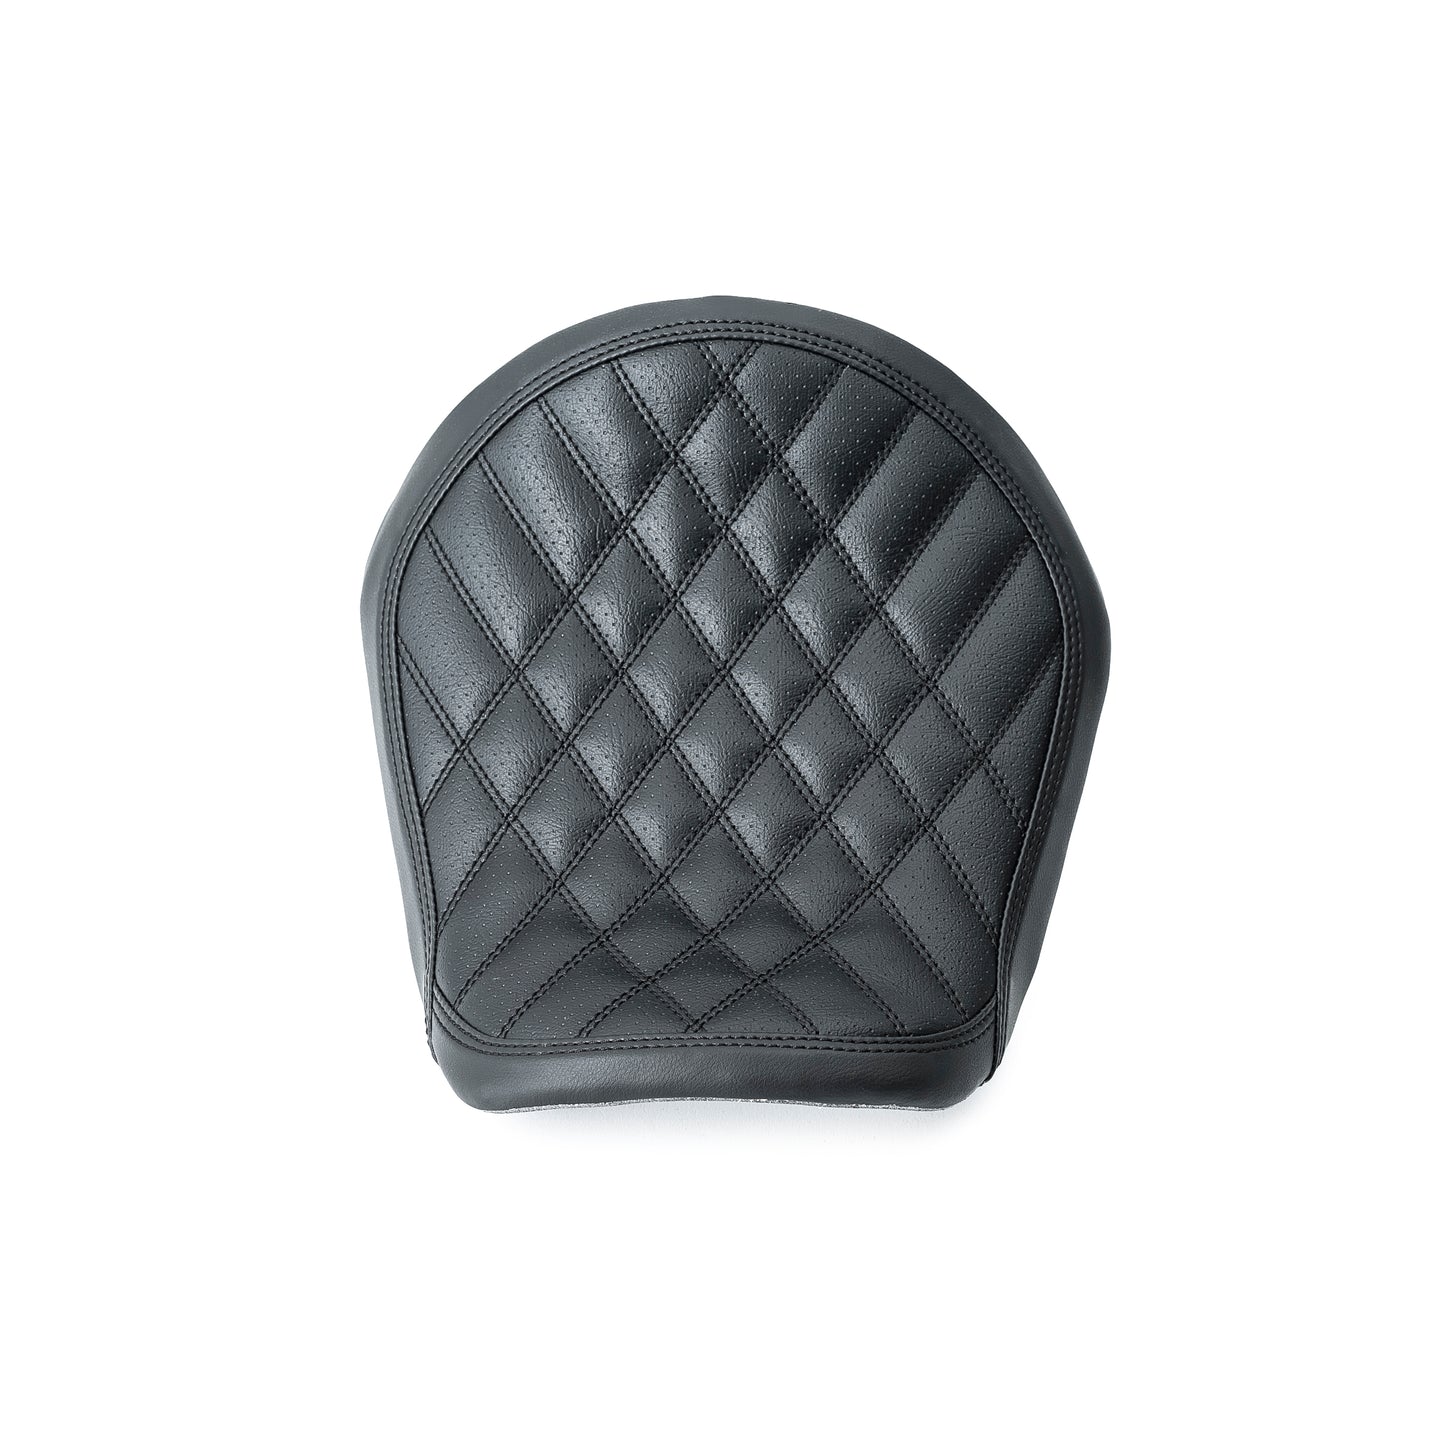 V-Rod Seat For "Short/Smooth Oval" Rear Fenders